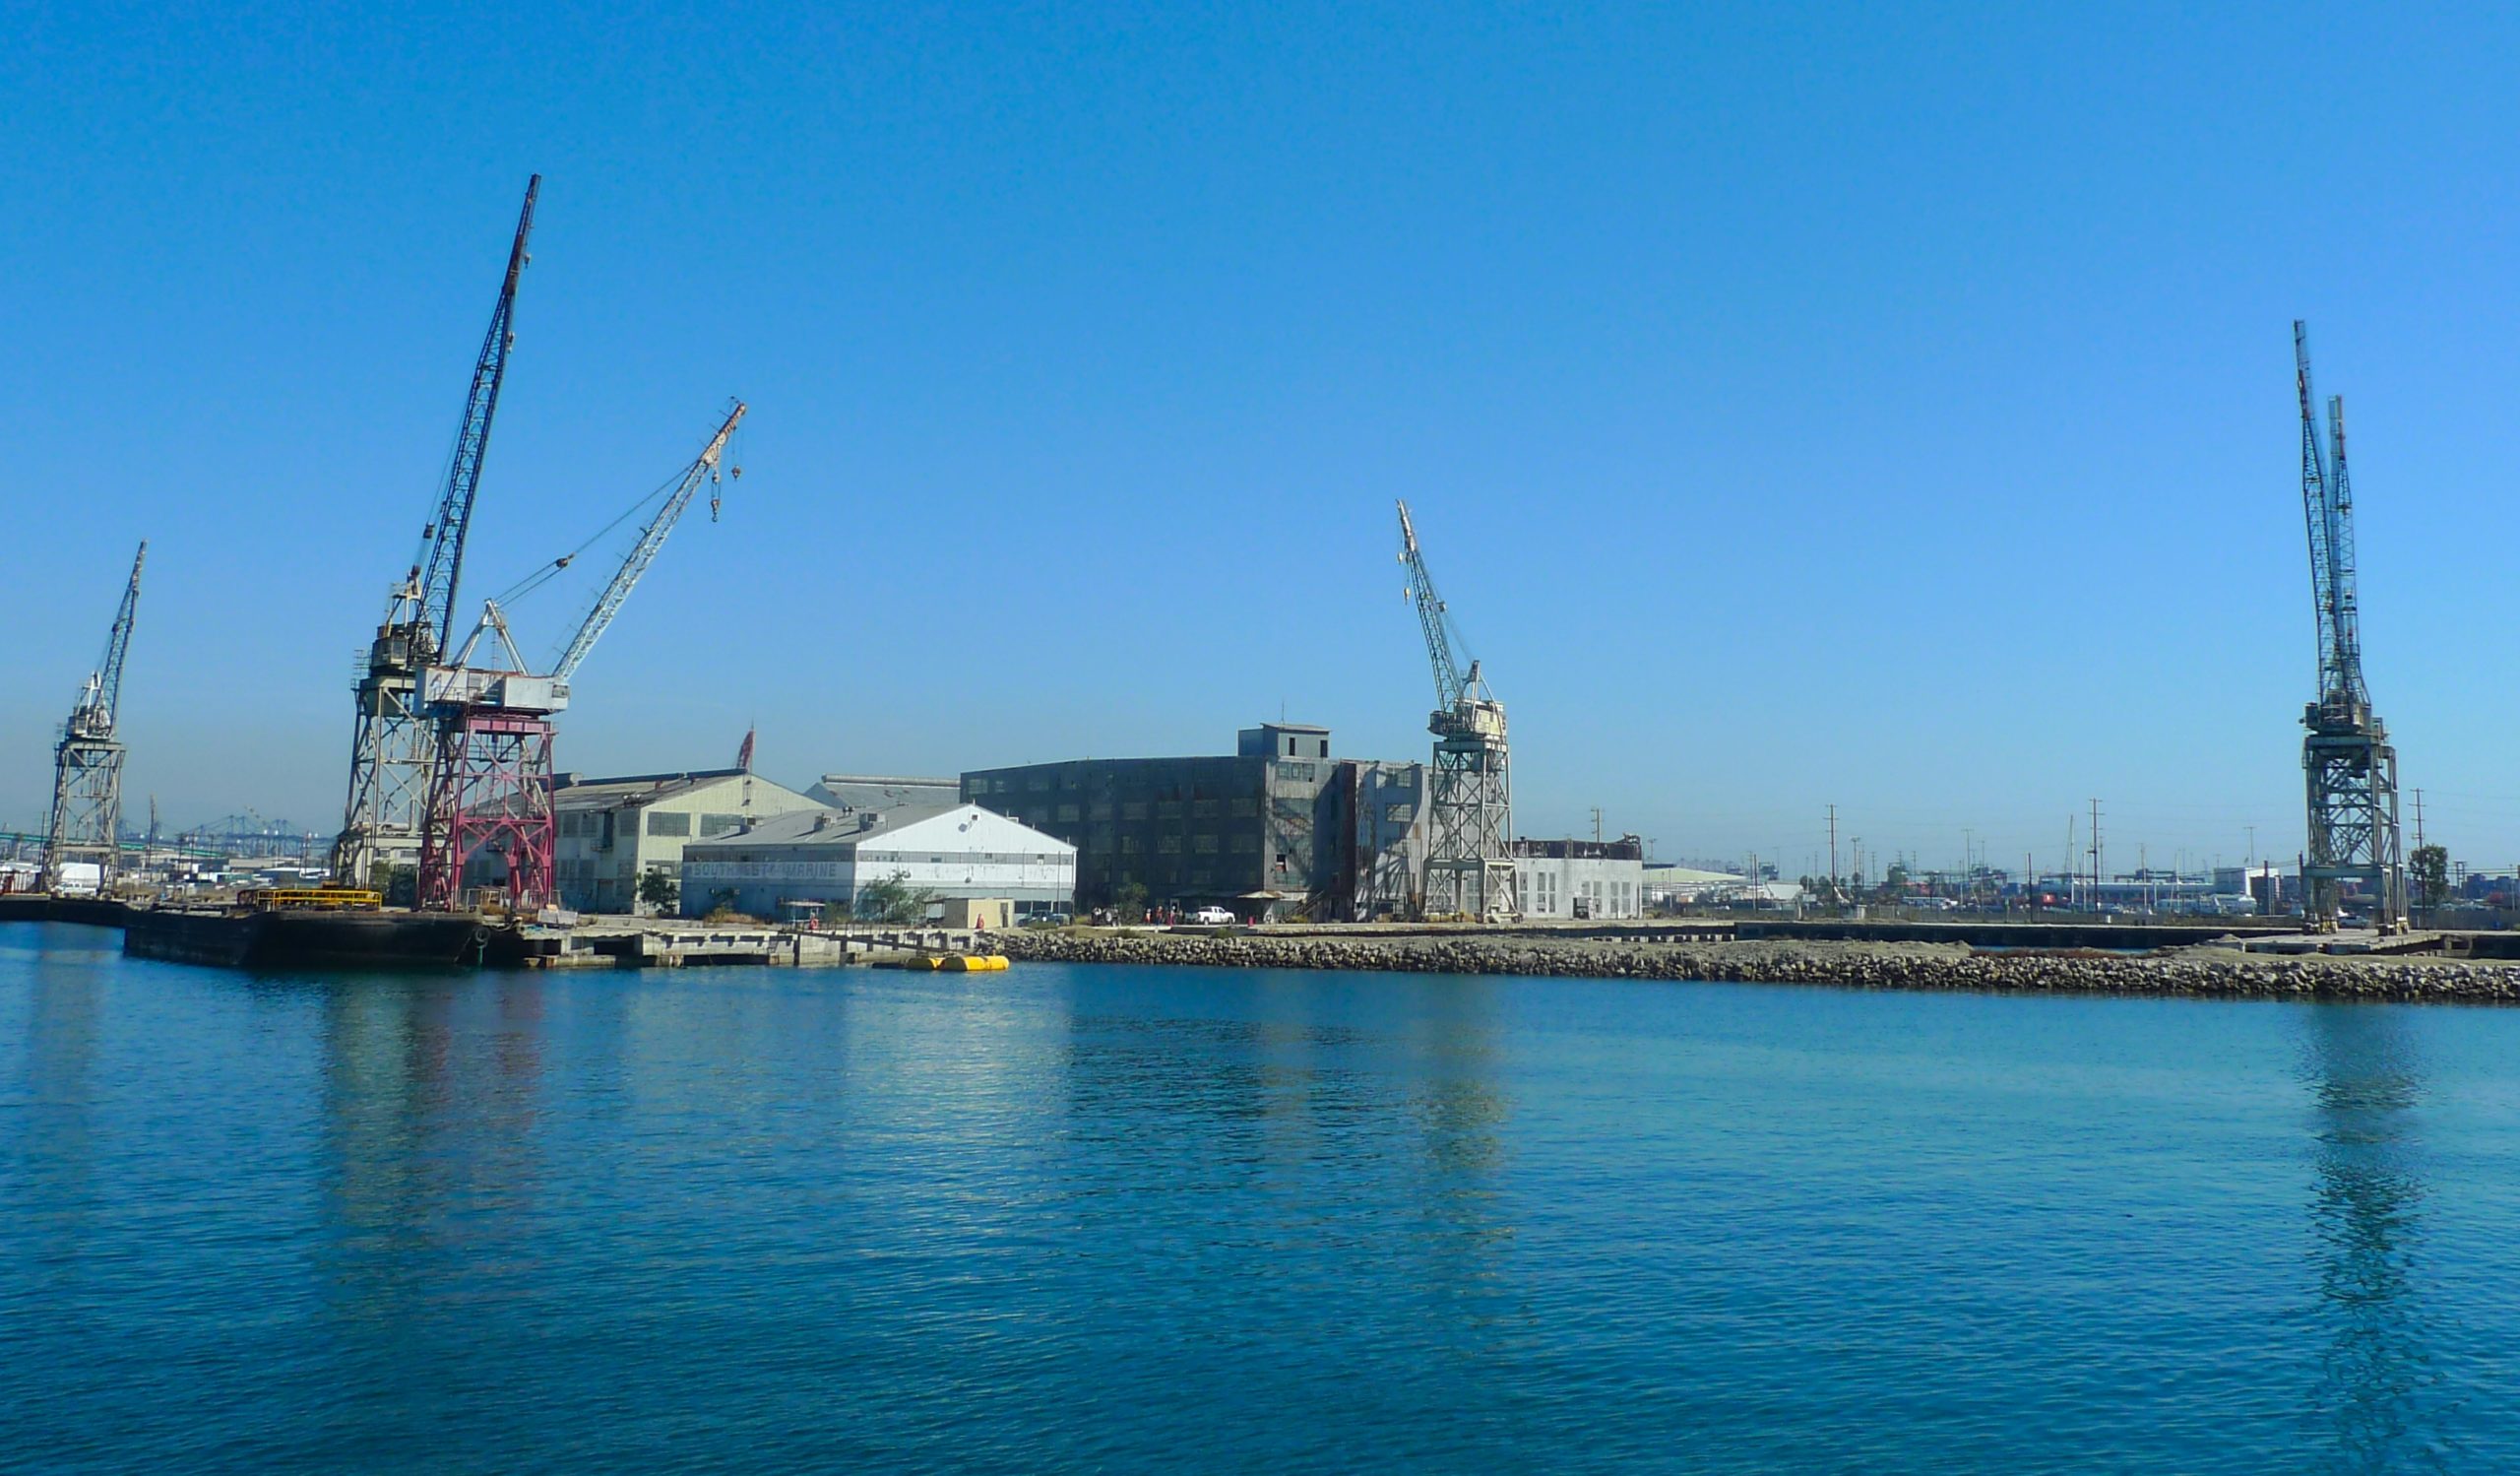 A Tour Of The World’s Most Futuristic Port